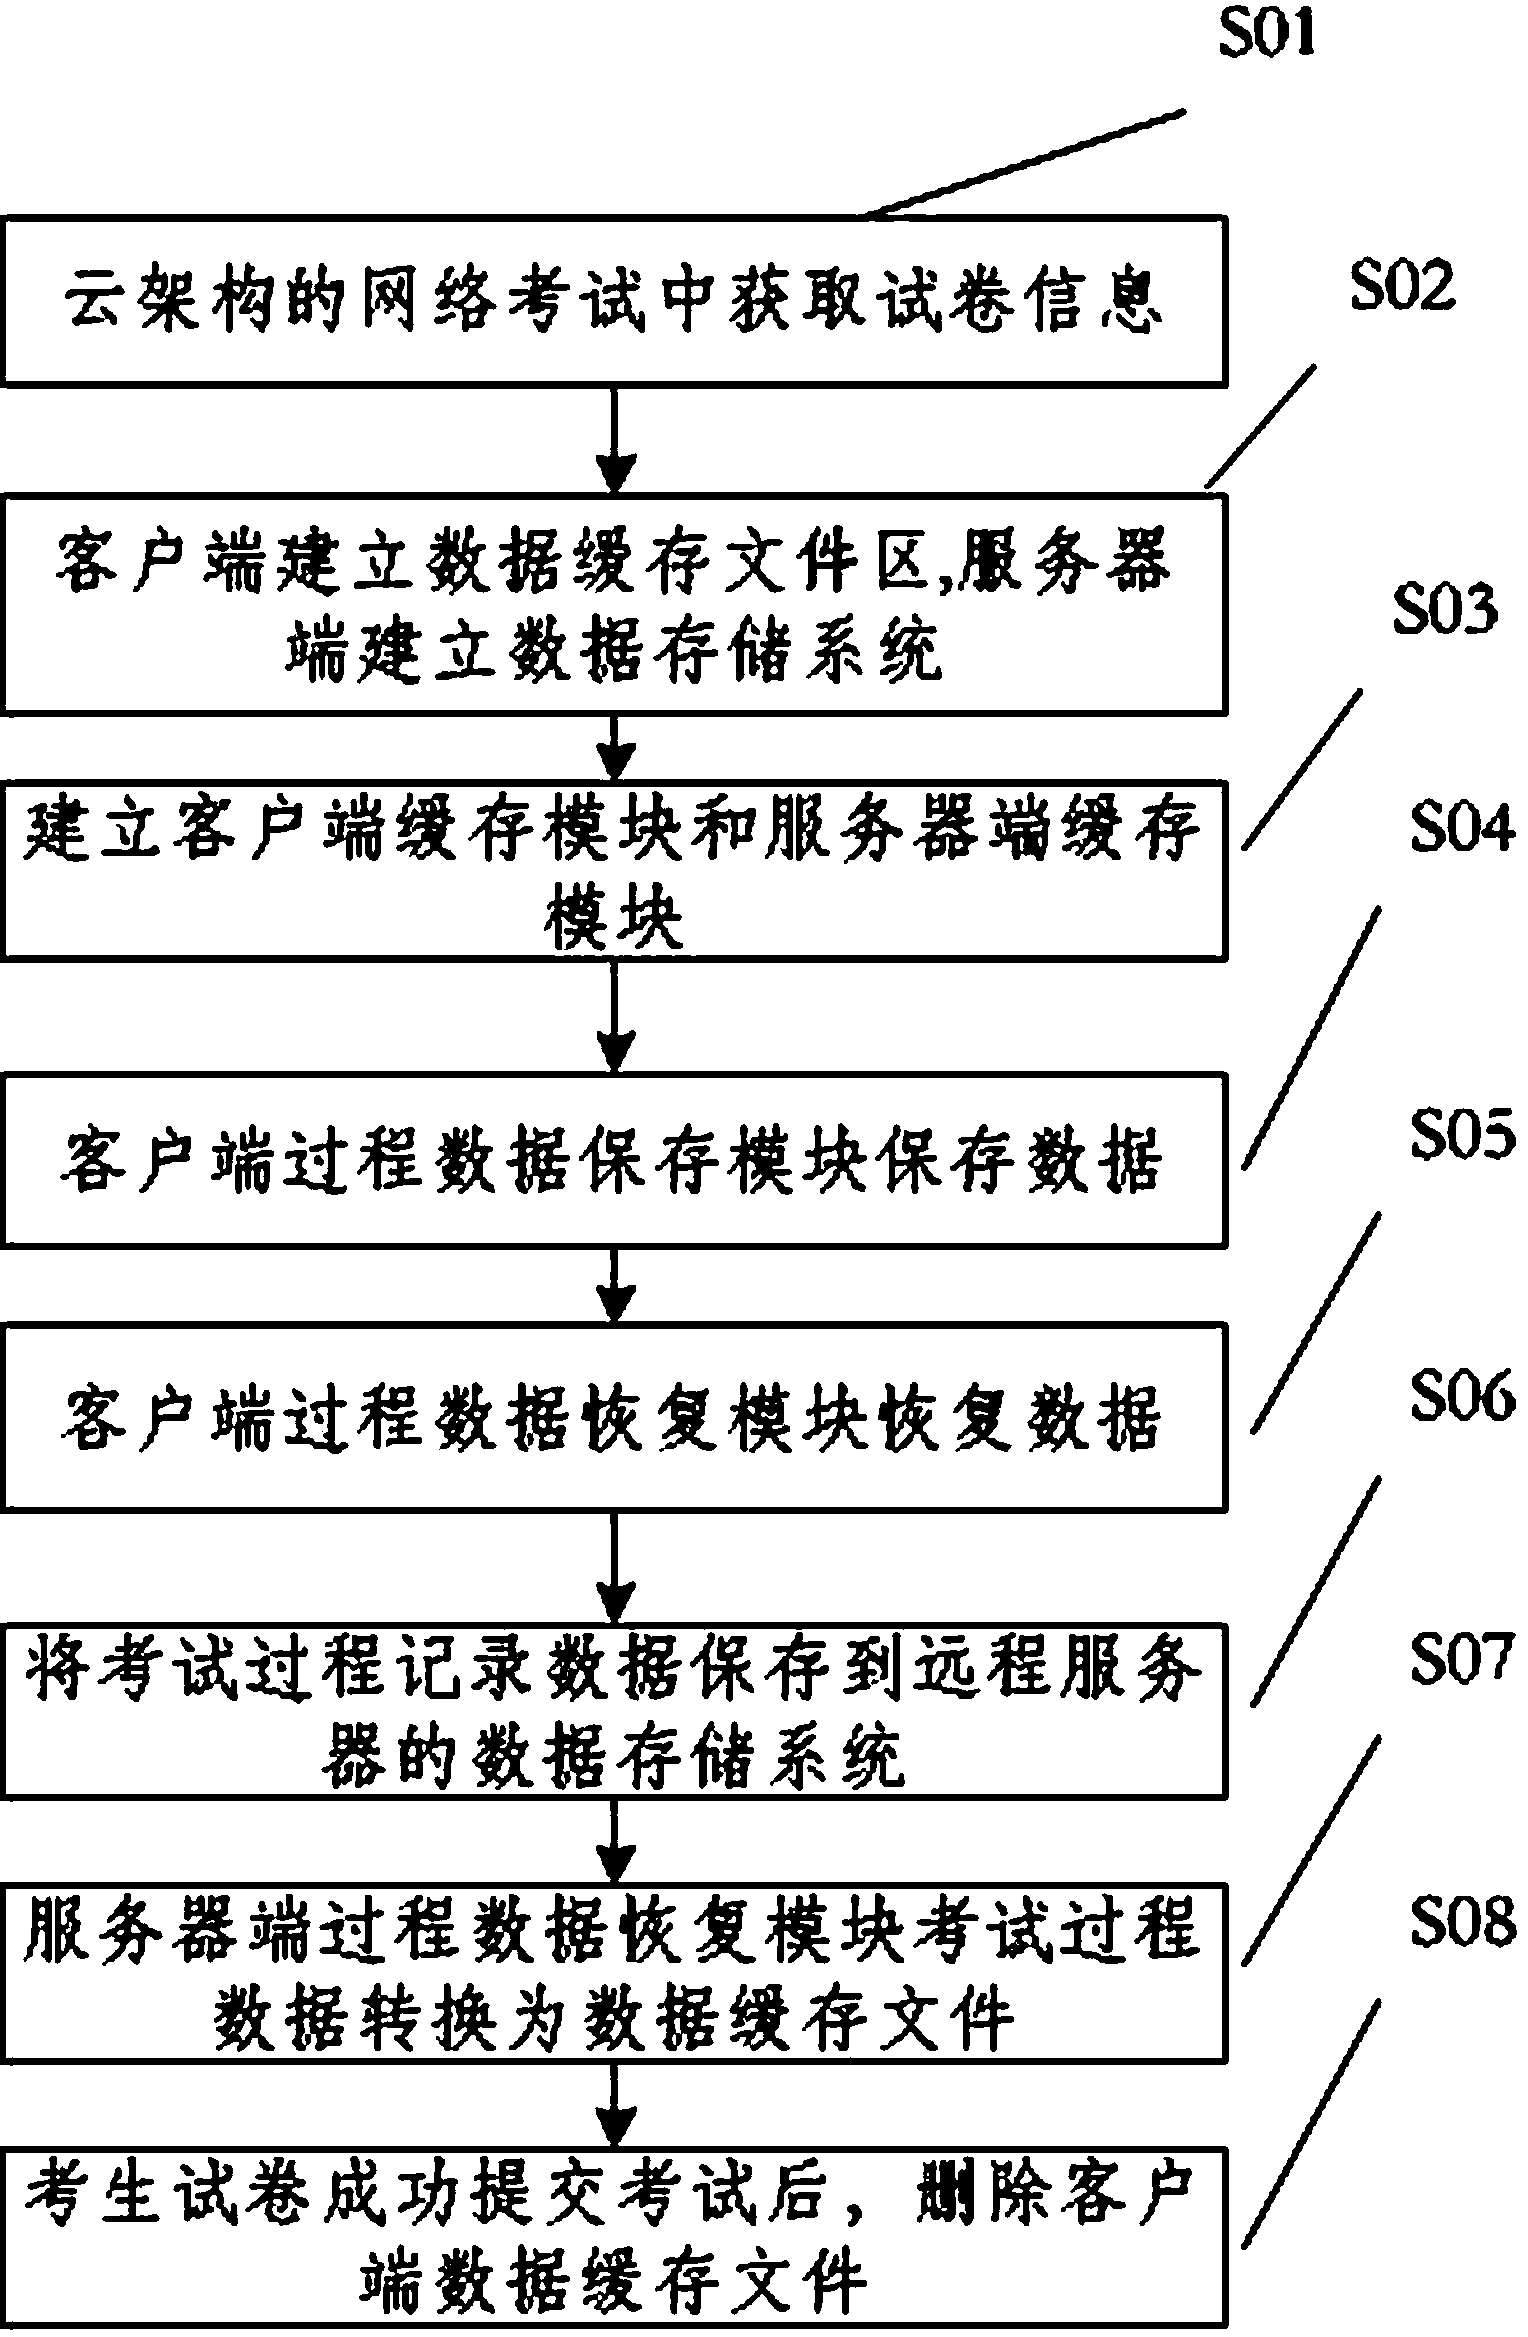 Cloud architecture-based network test data double-cache method